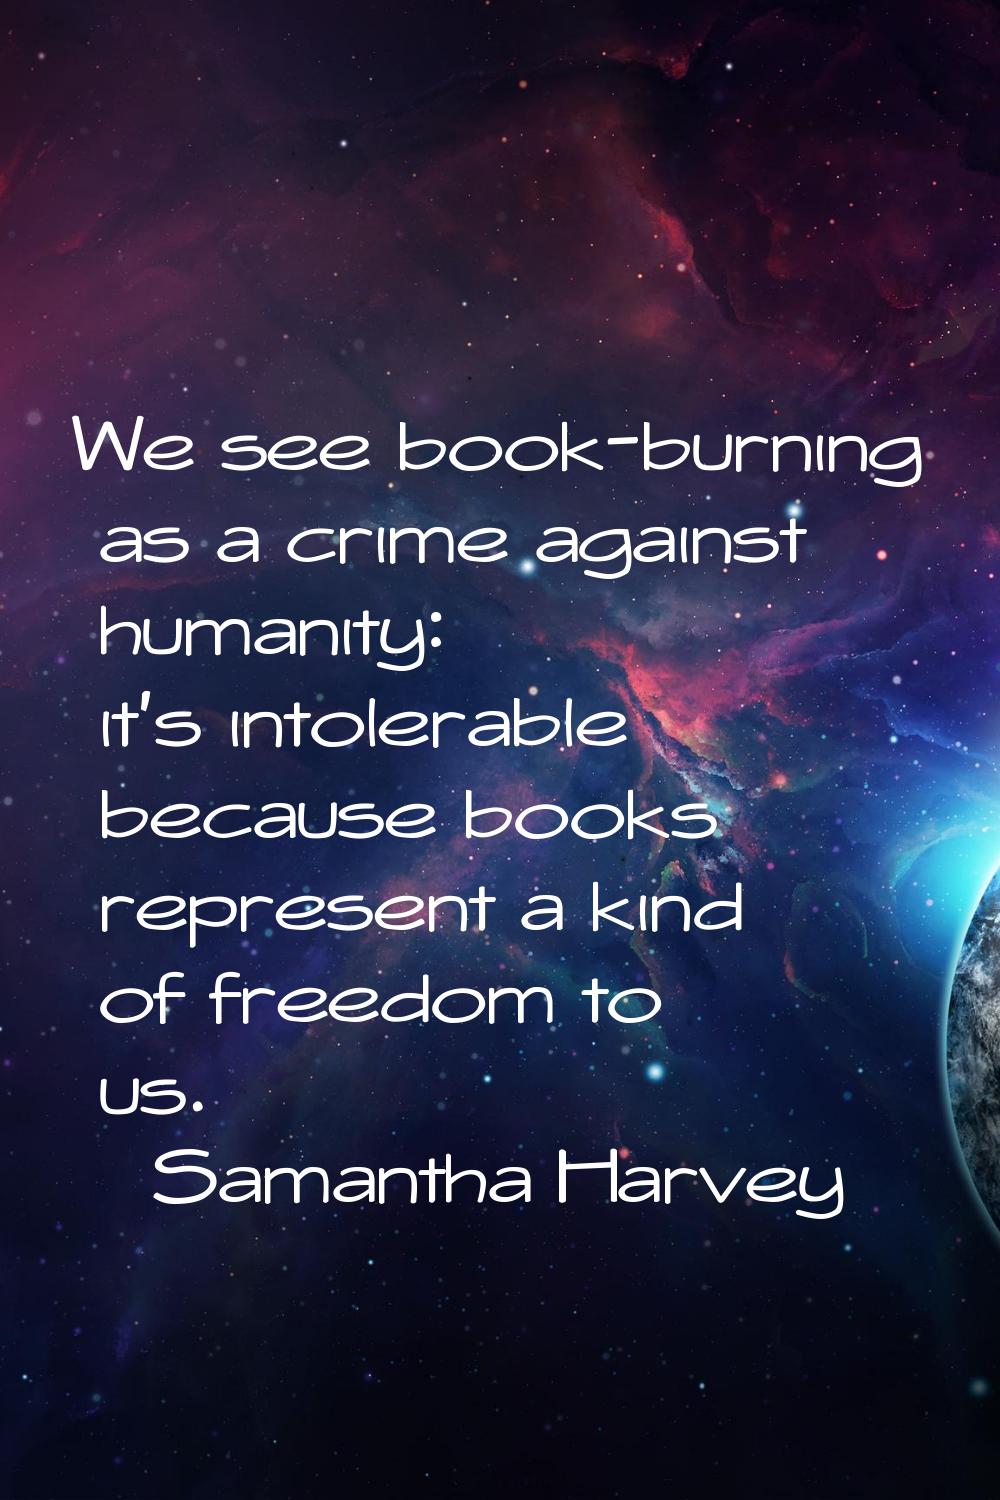 We see book-burning as a crime against humanity: it's intolerable because books represent a kind of